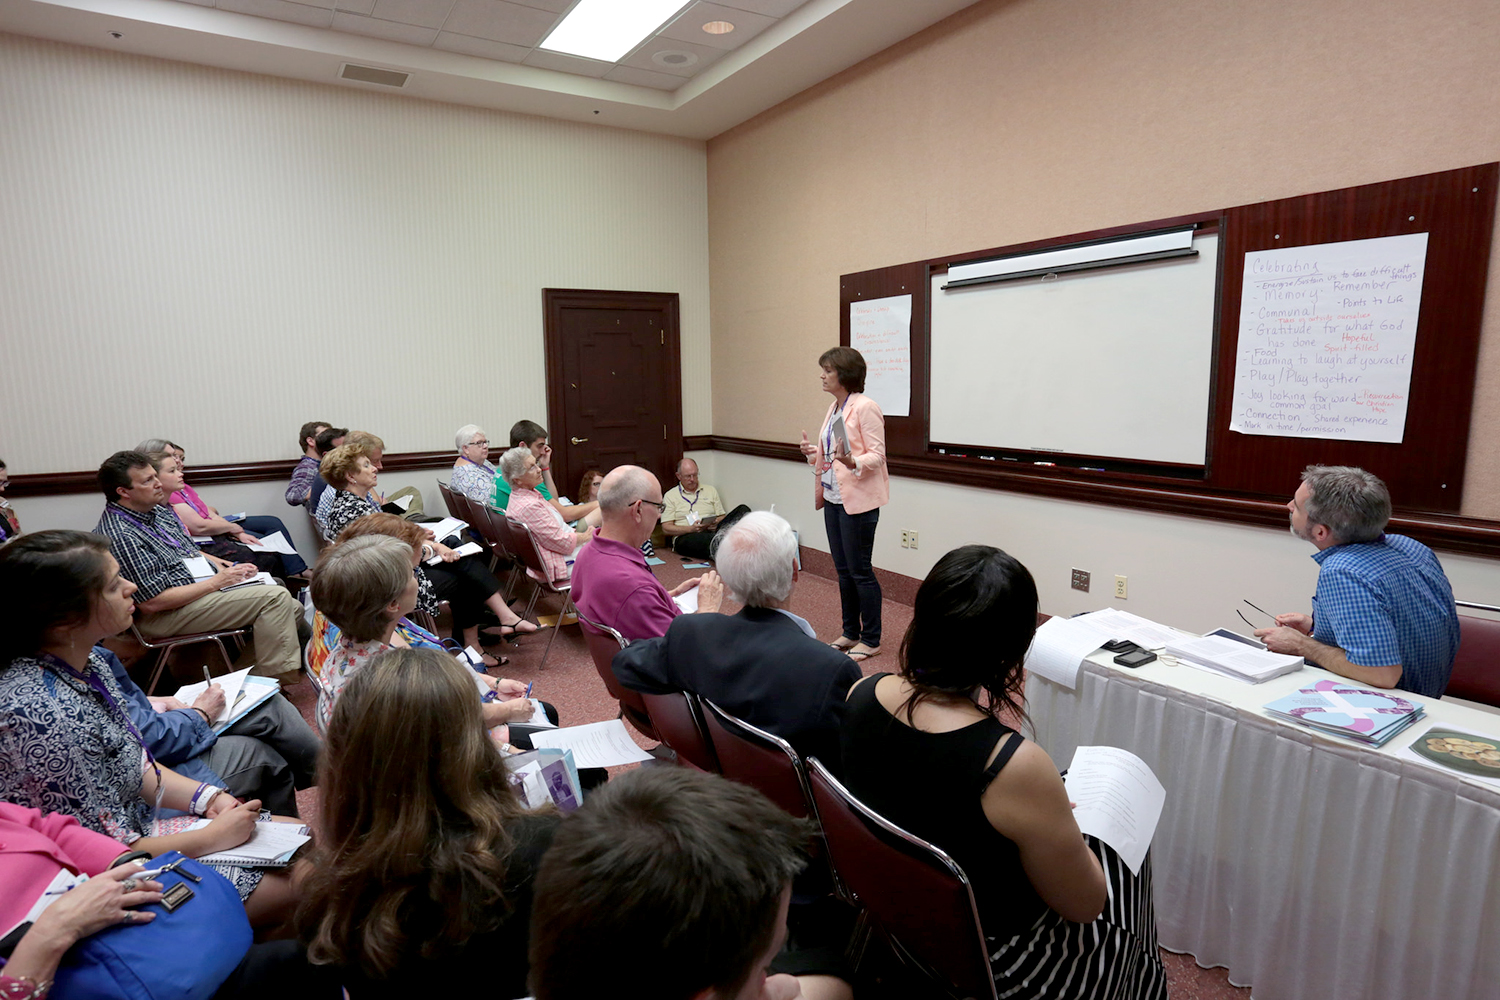 Jayne Davis, standing, and Rick Bennett, seated at right, lead a workshop on celebration as spiritual discipline at CBF's 2016 General Assembly in Greensboro, N.C. (Photo/CBF)